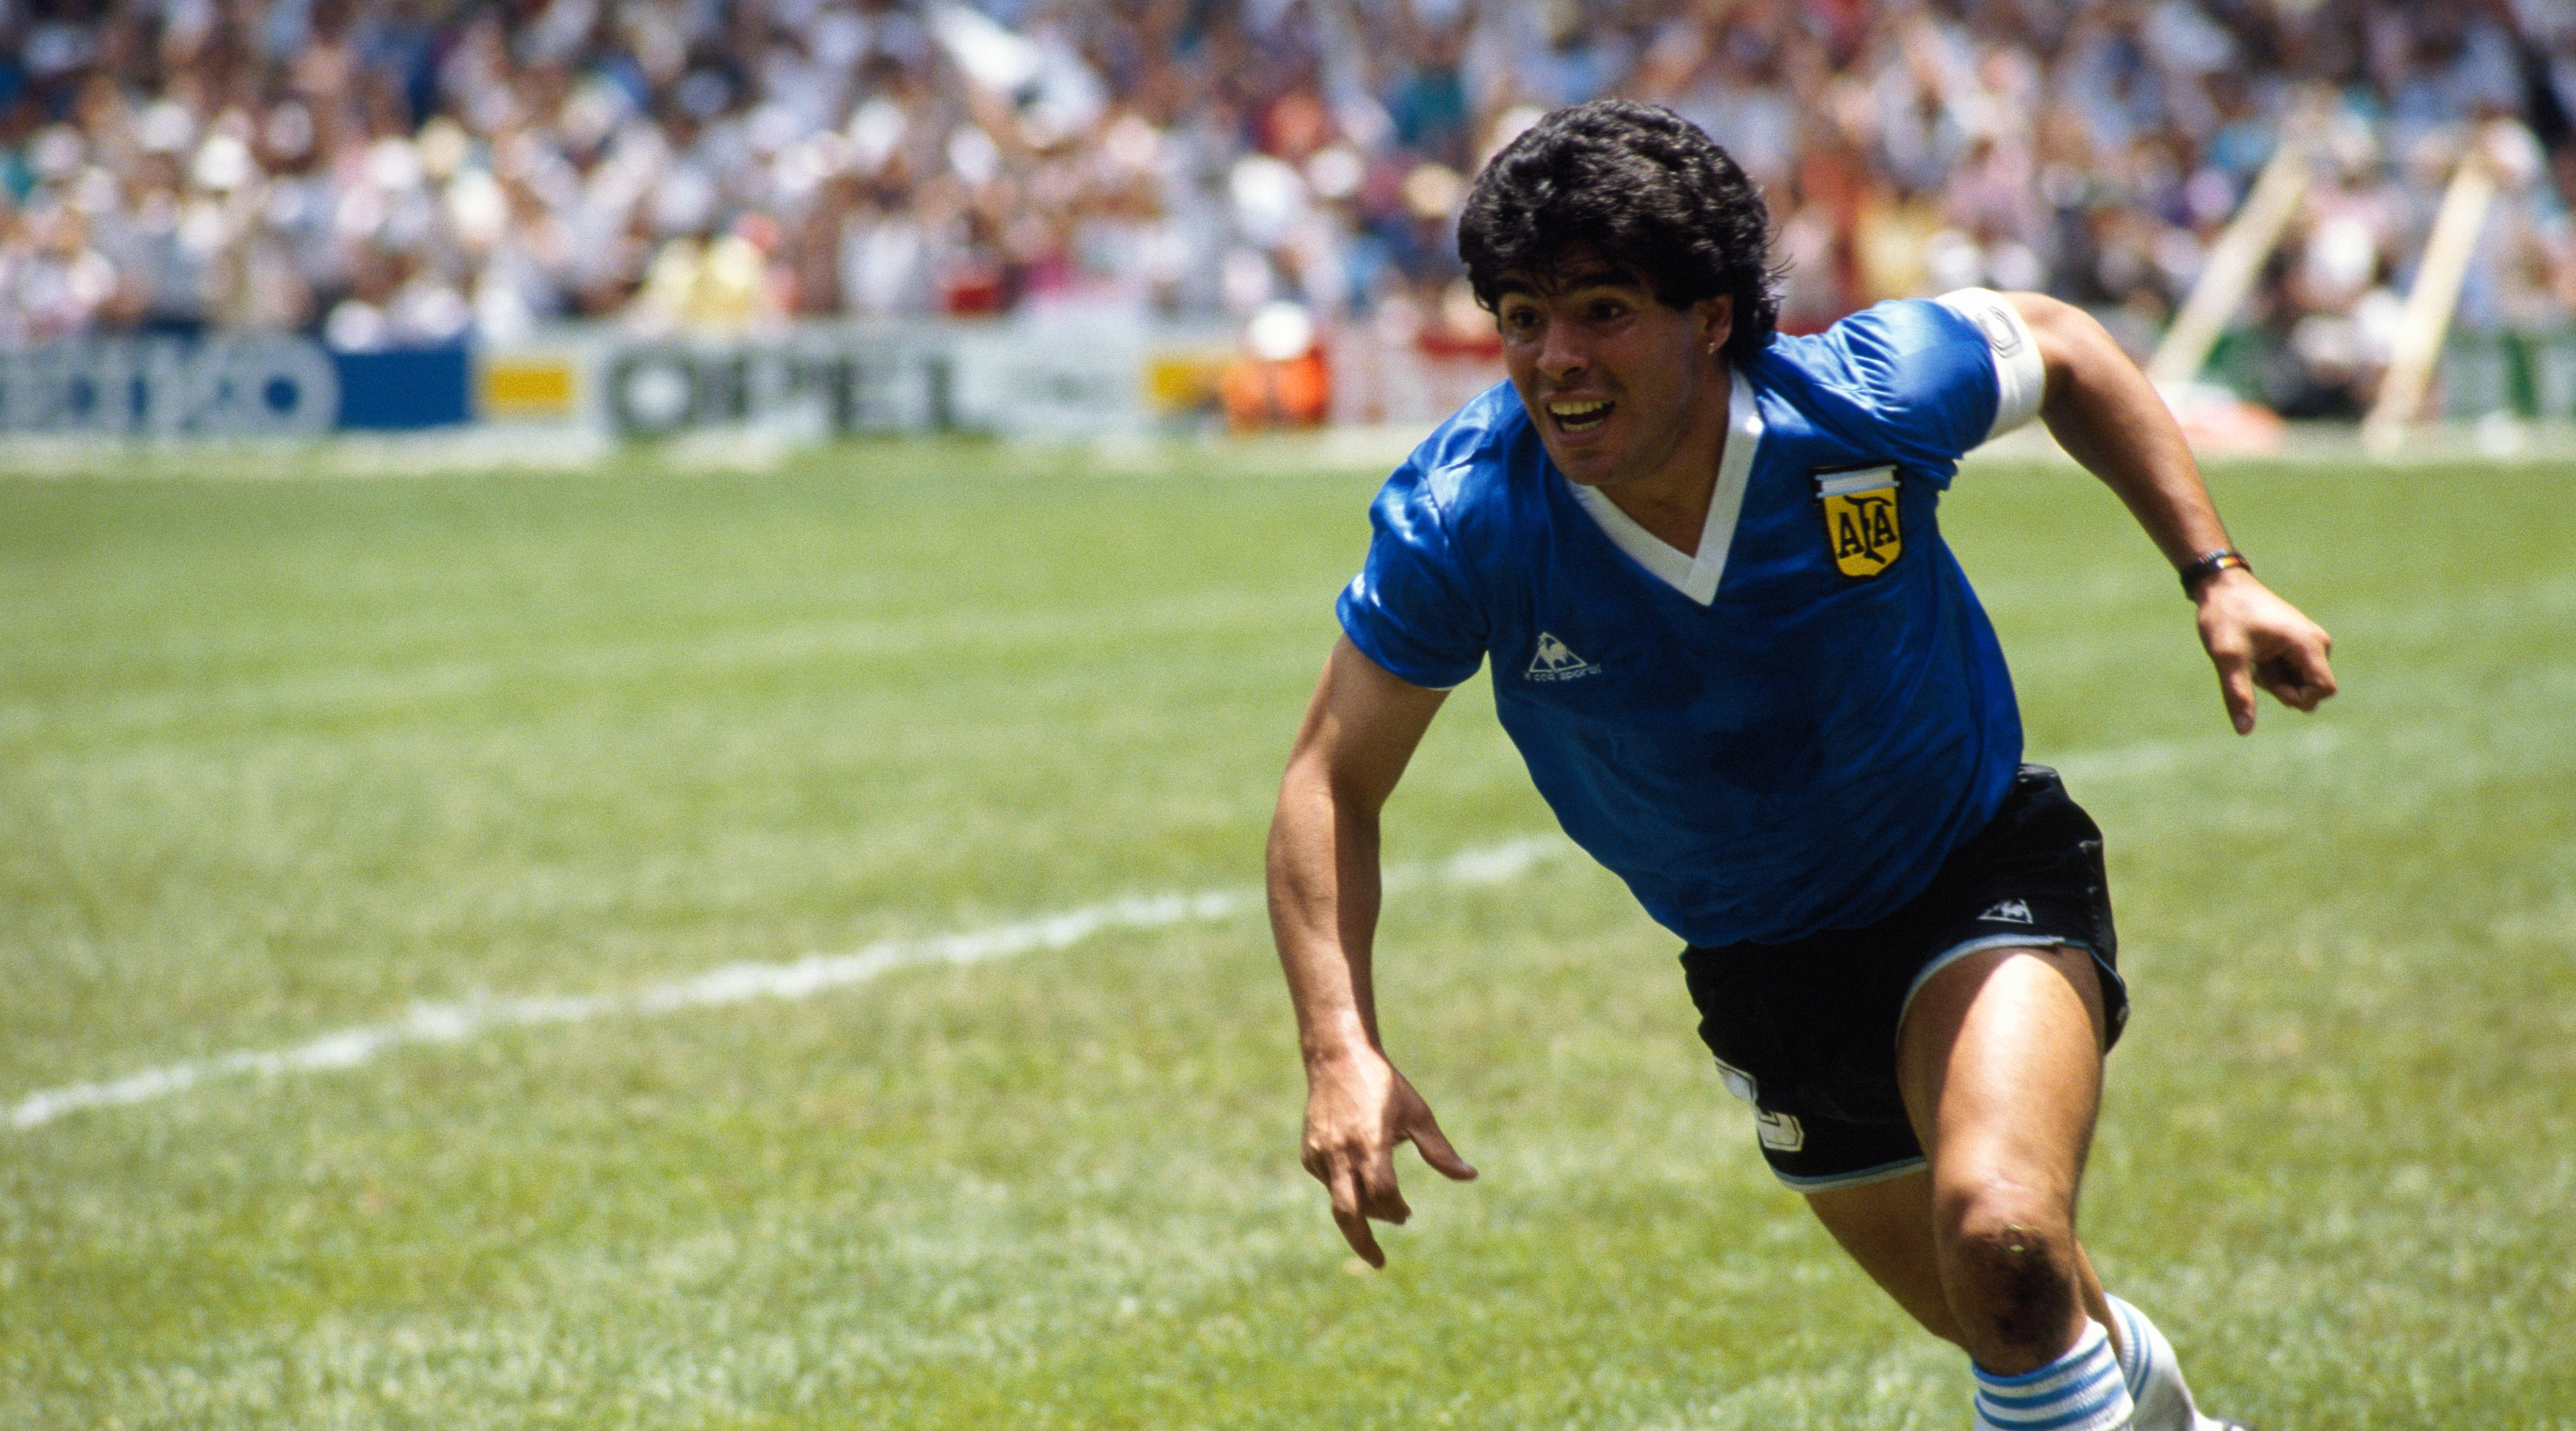 Diego Maradona from Argentina celebrates after scoring his second goal against England in a quarterfinal match of the 1986 FIFA World Cup. (Photo by Jean-Yves Ruszniewski/Corbis/VCG via Getty Images)